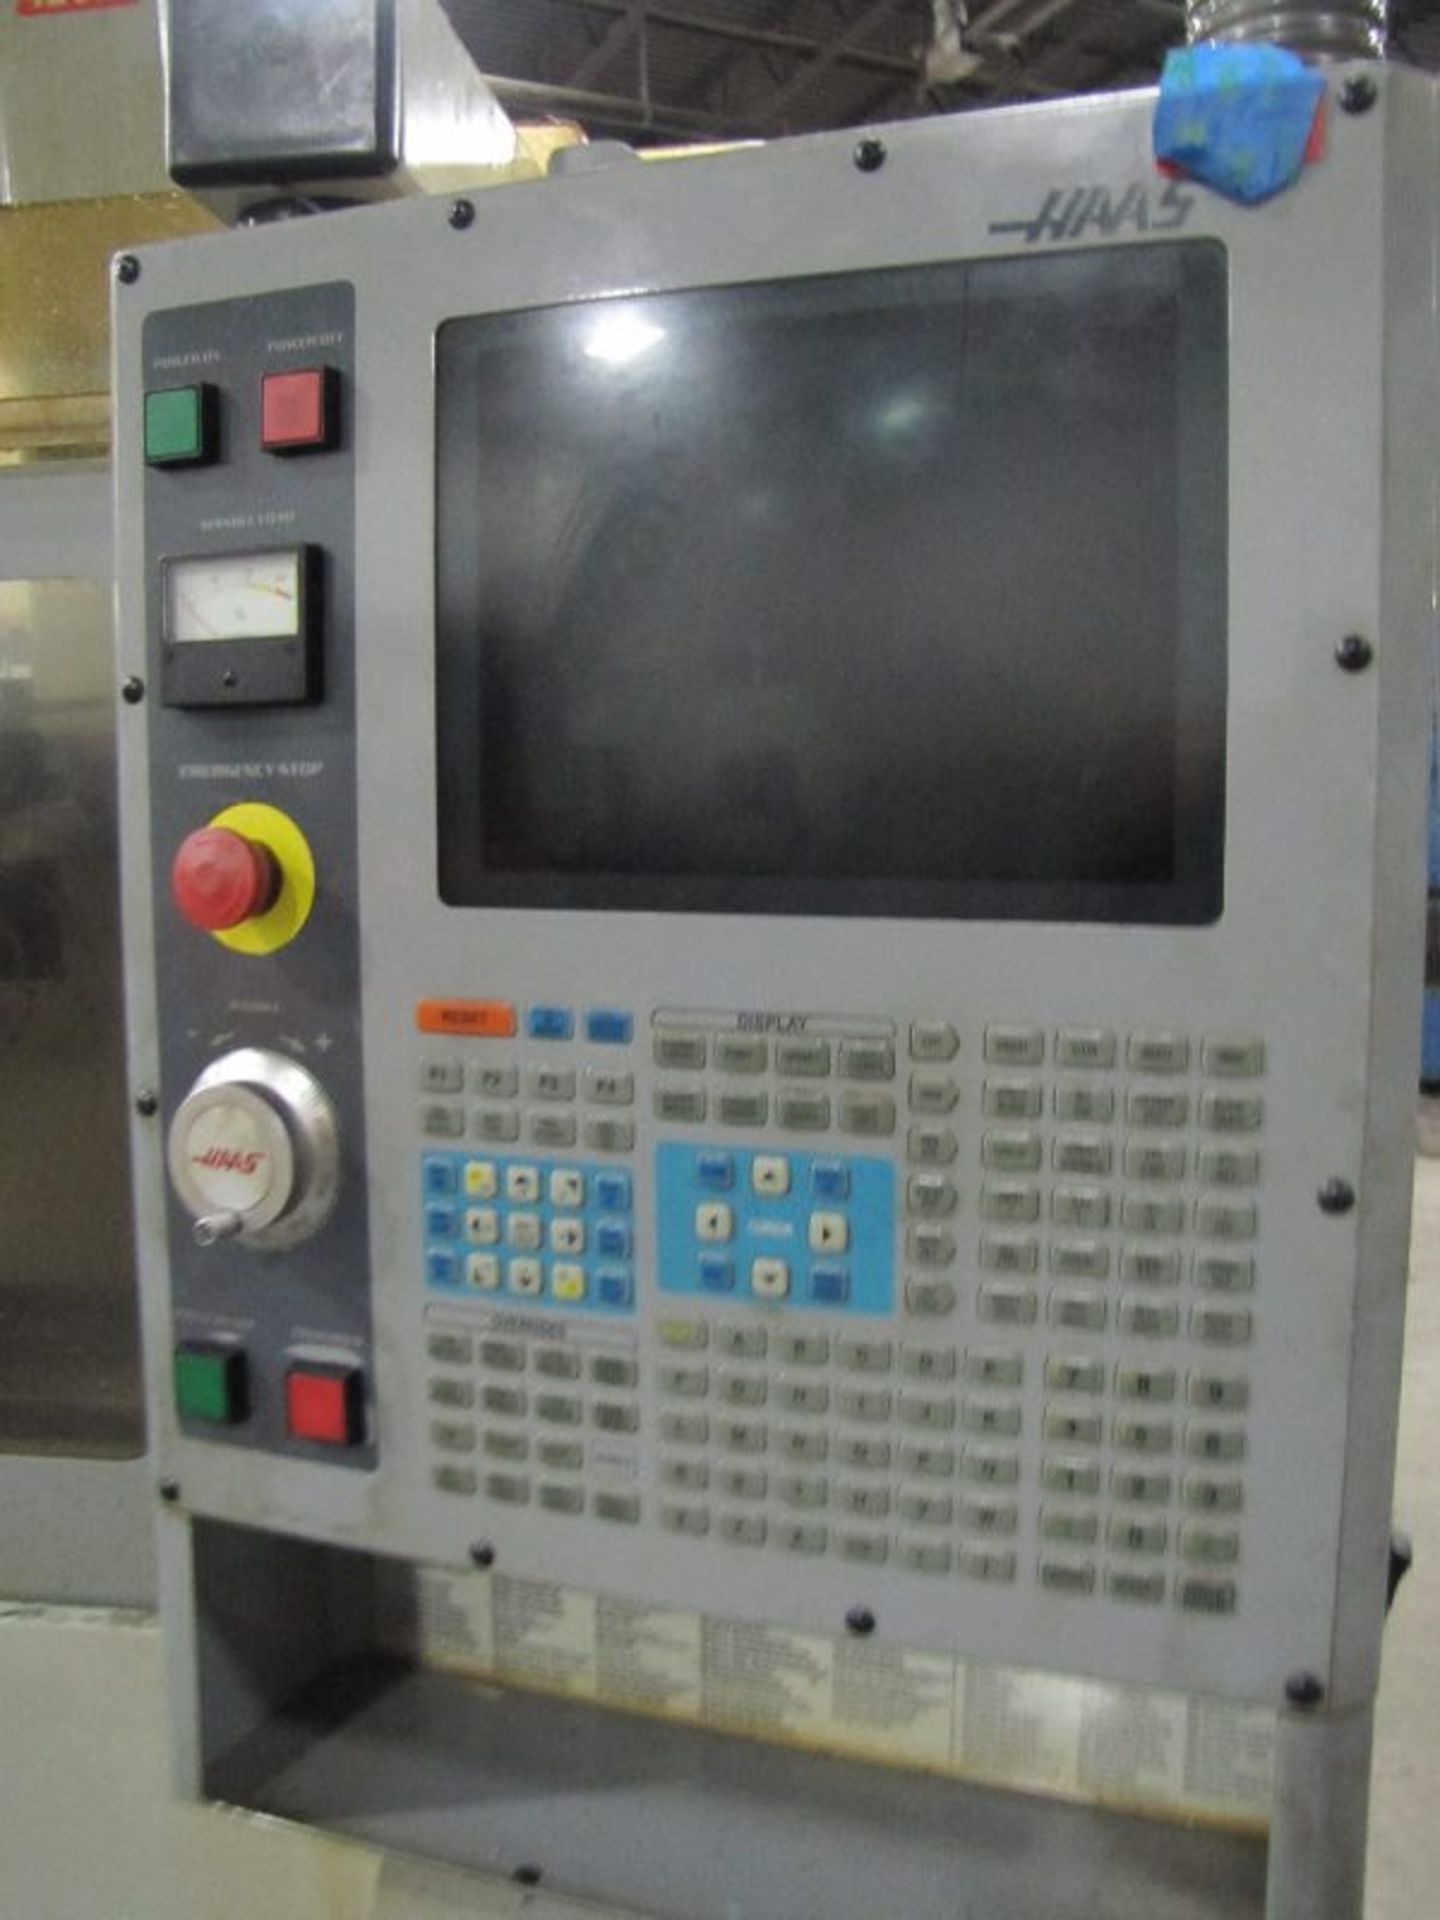 HAAS Super Mini Mill Vertical CNC Mill, S/N: 30363 Mfg. 12/02, HAAS CNC Control, Table Size 12” X - Image 3 of 9